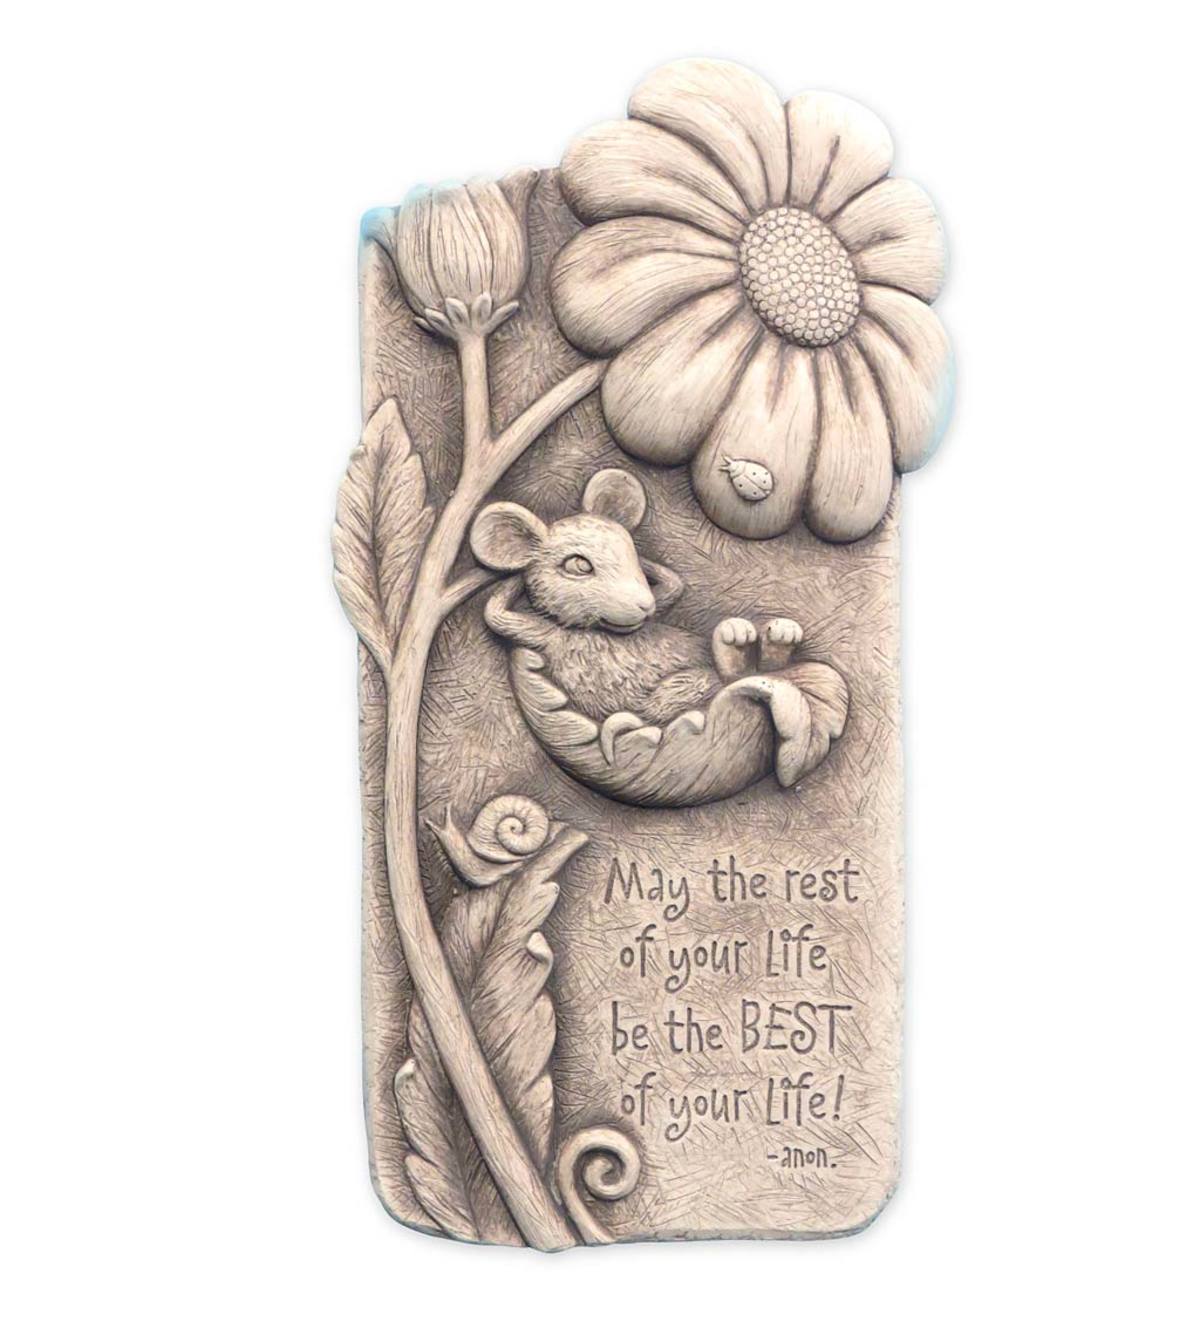 Best of Your Life Stone Plaque by Carruth Studio